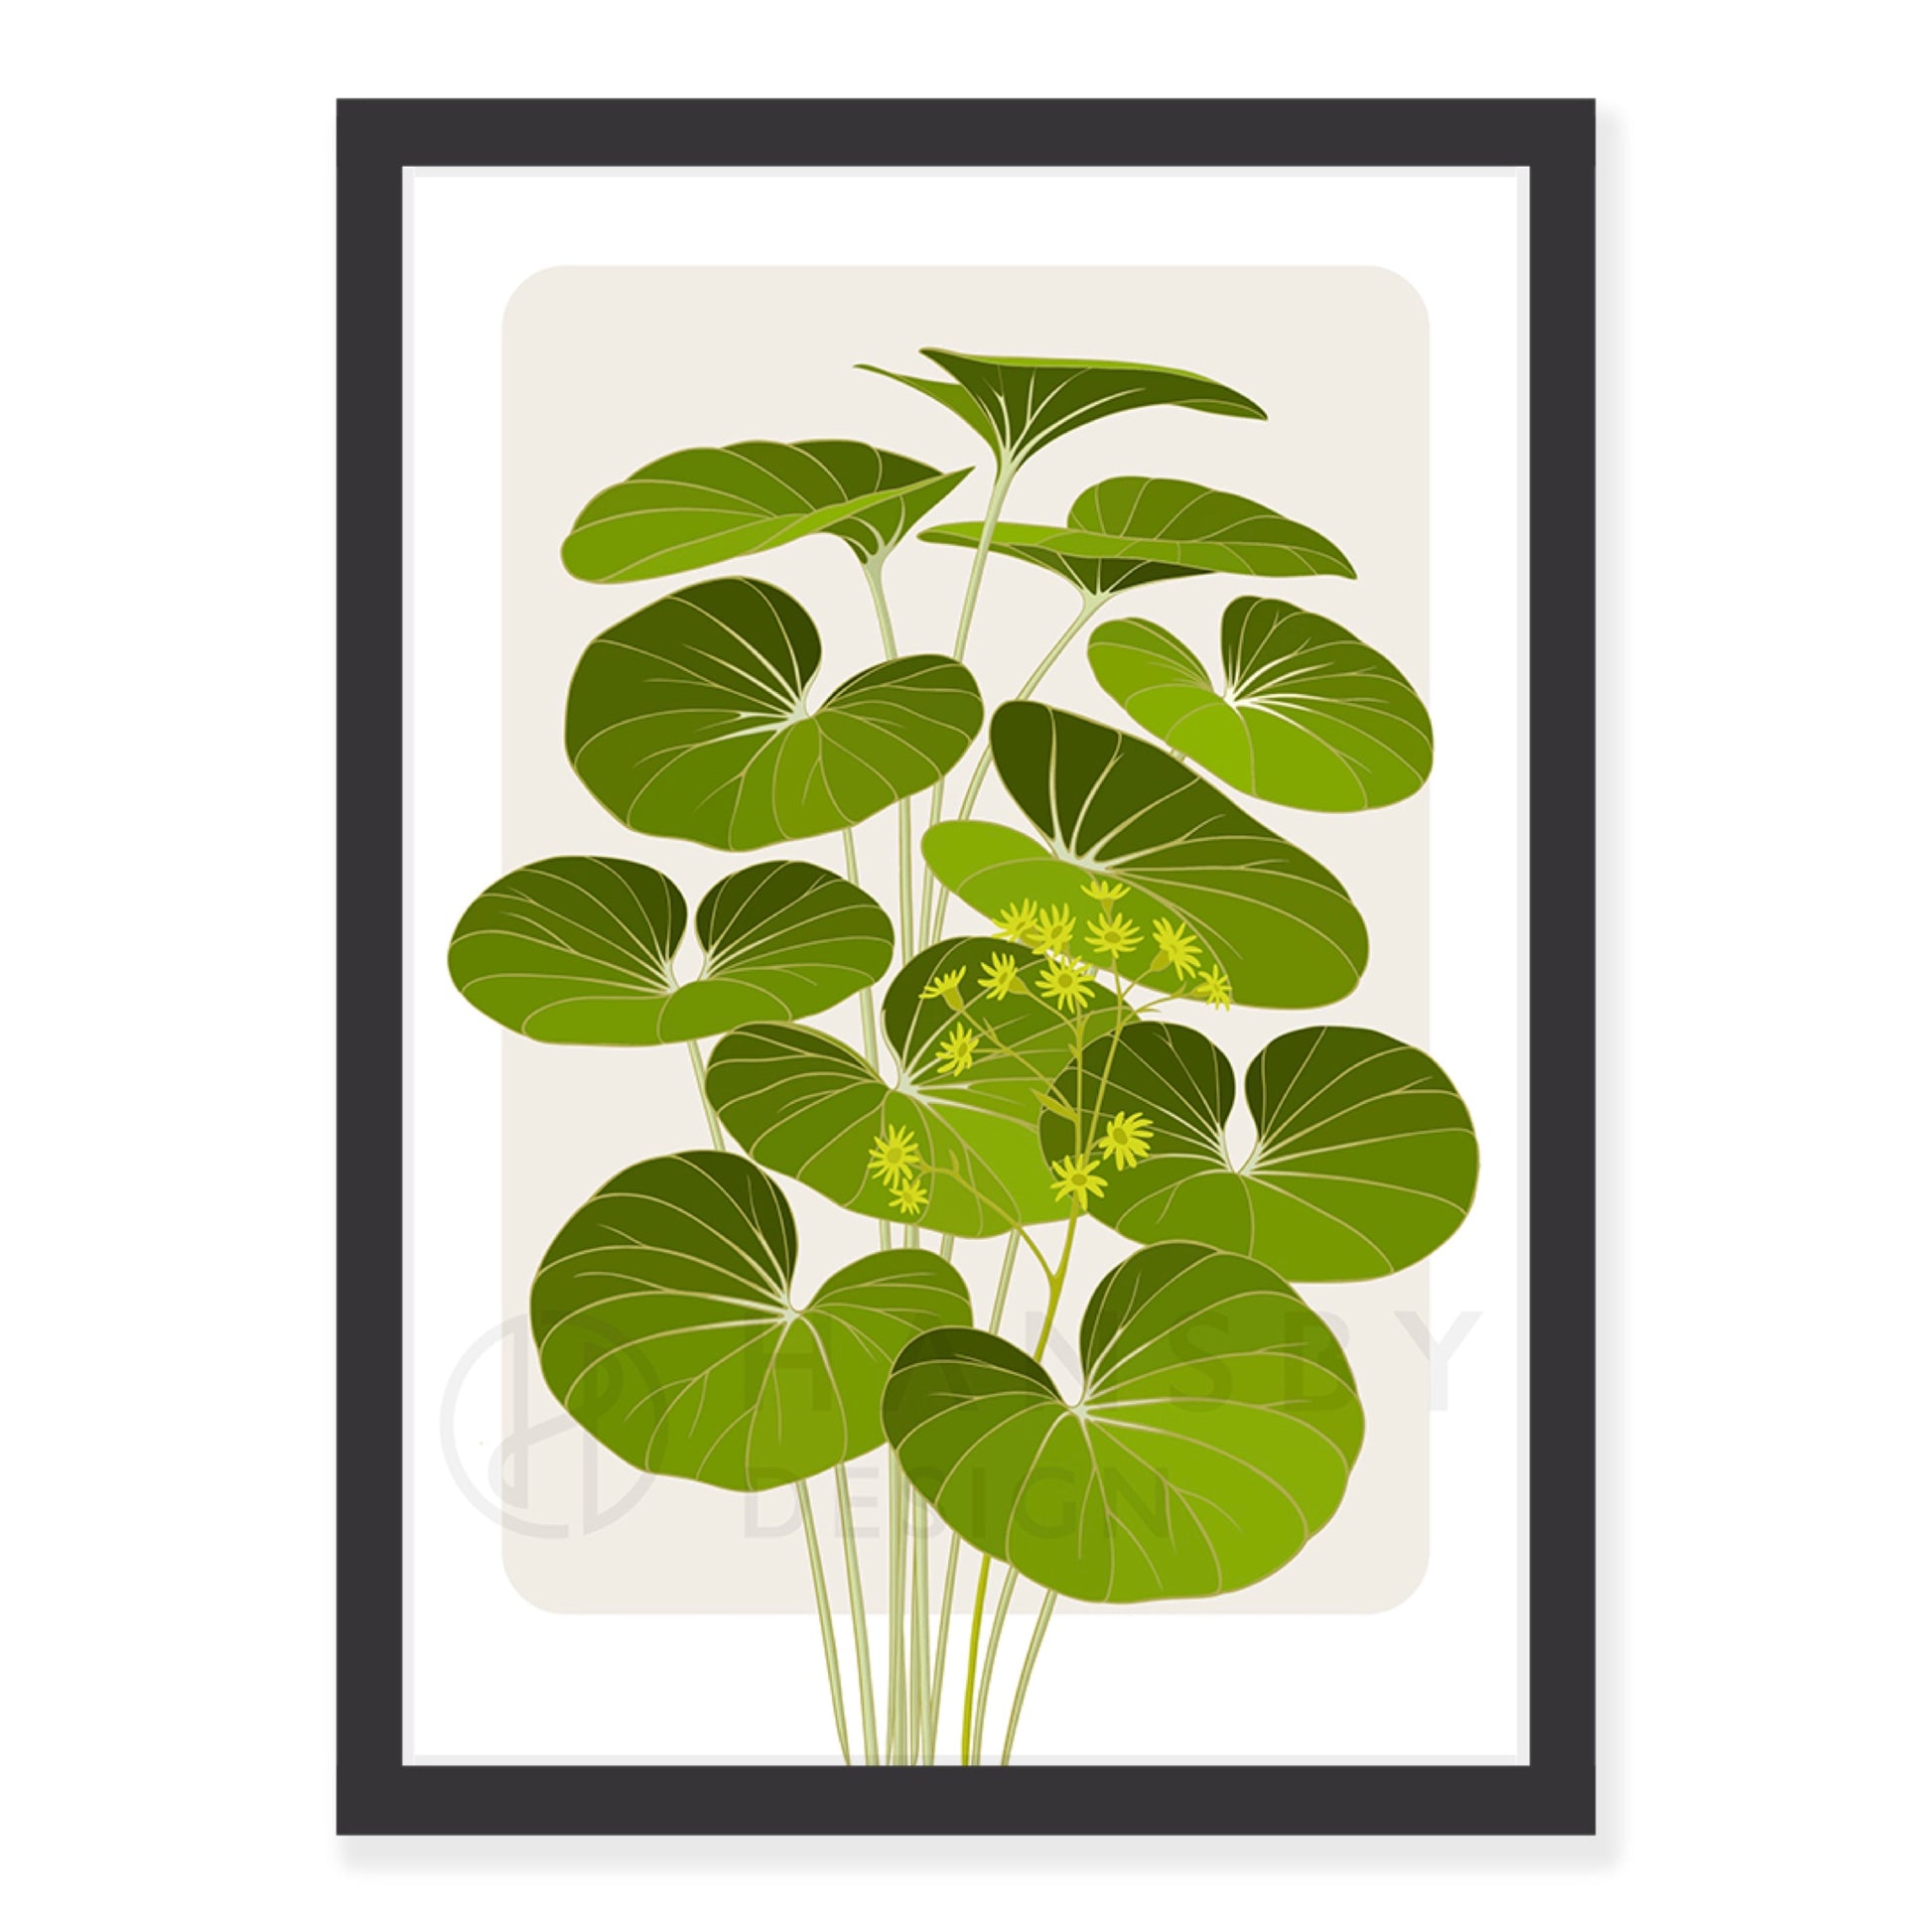 Tractor seat plant art print in black frame, by NZ artist Hansby Design